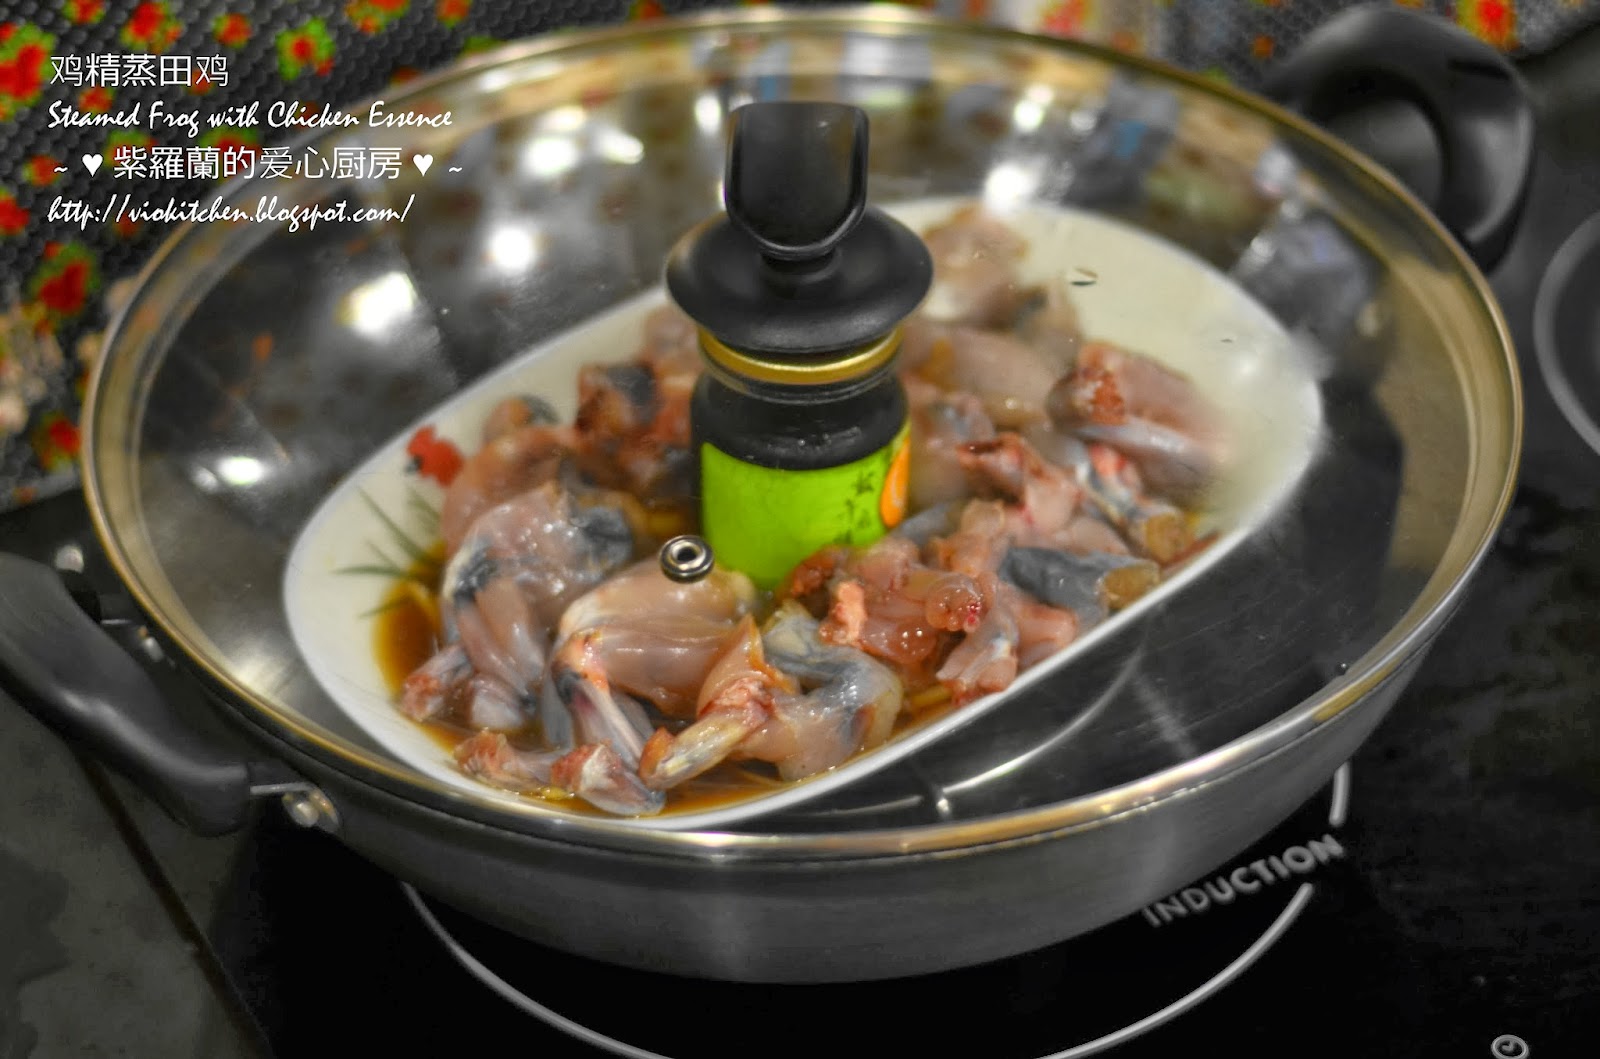 Violet's Kitchen ~♥紫羅蘭的爱心厨房♥~ : 鸡精蒸田鸡 Steamed Frog with Chicken Essence